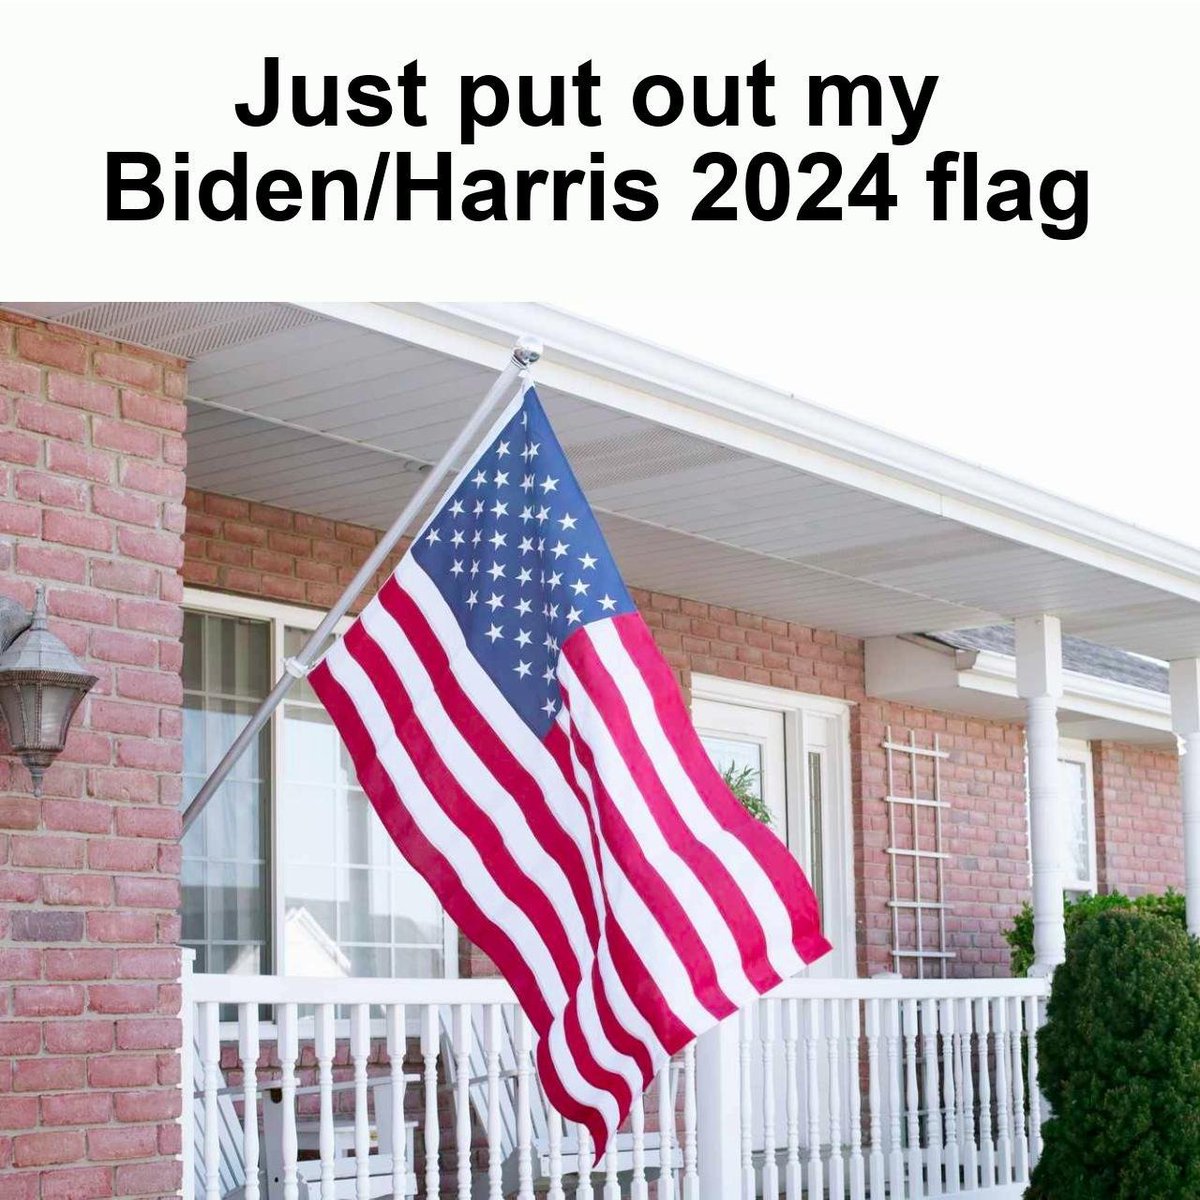 I prefer OUR Biden/Harris flags to their trump flags. How about YOU? 🇺🇸